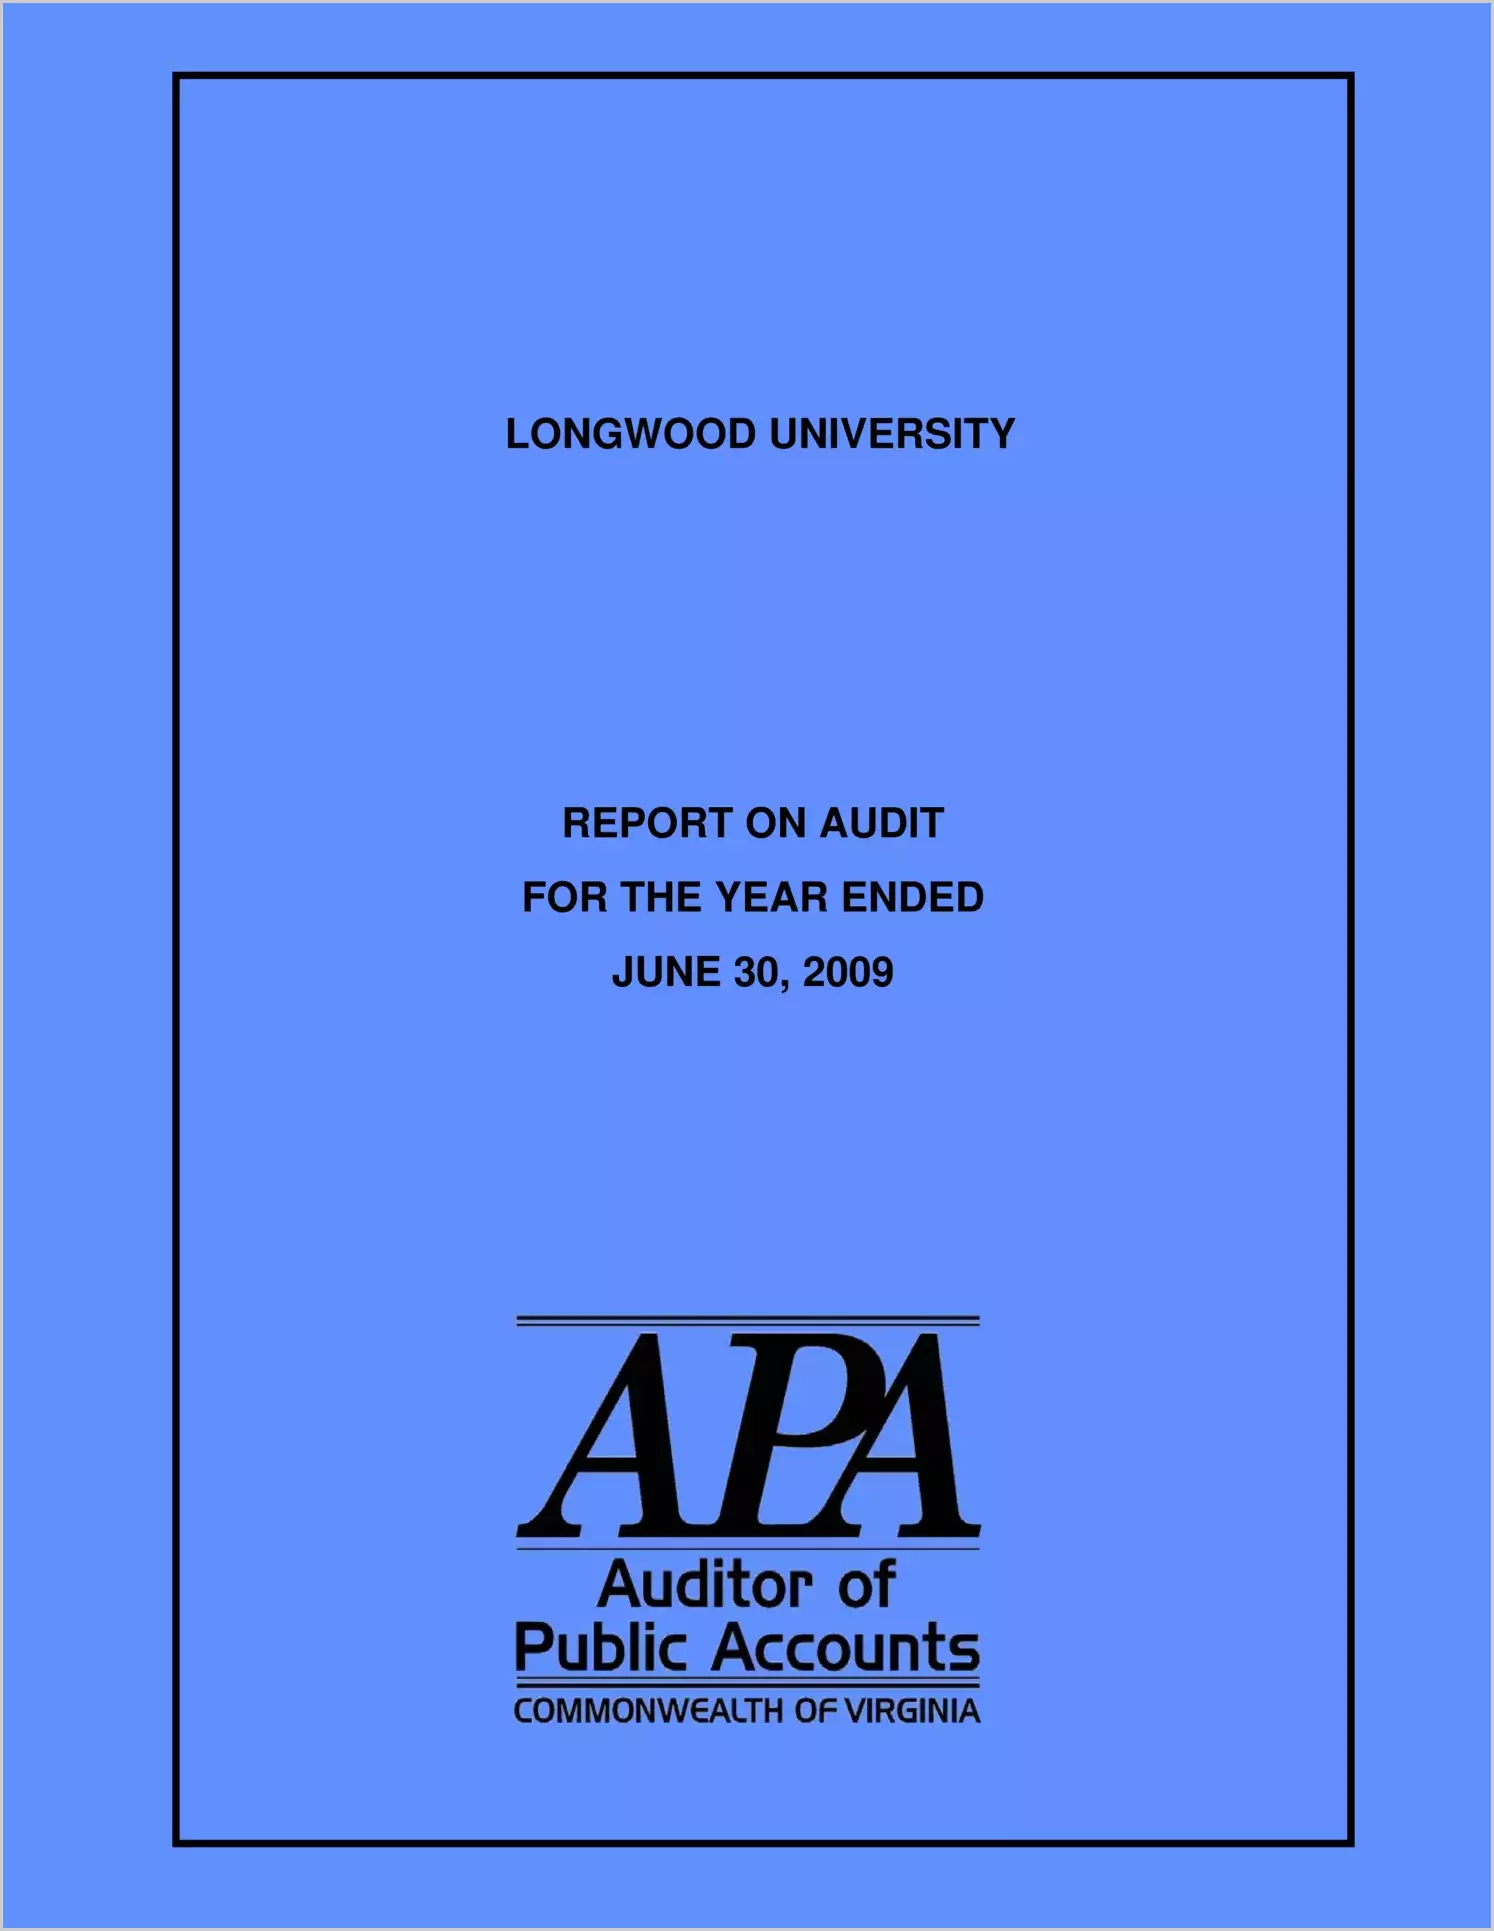 Longwood University report on audit for the year ended June 30, 2009